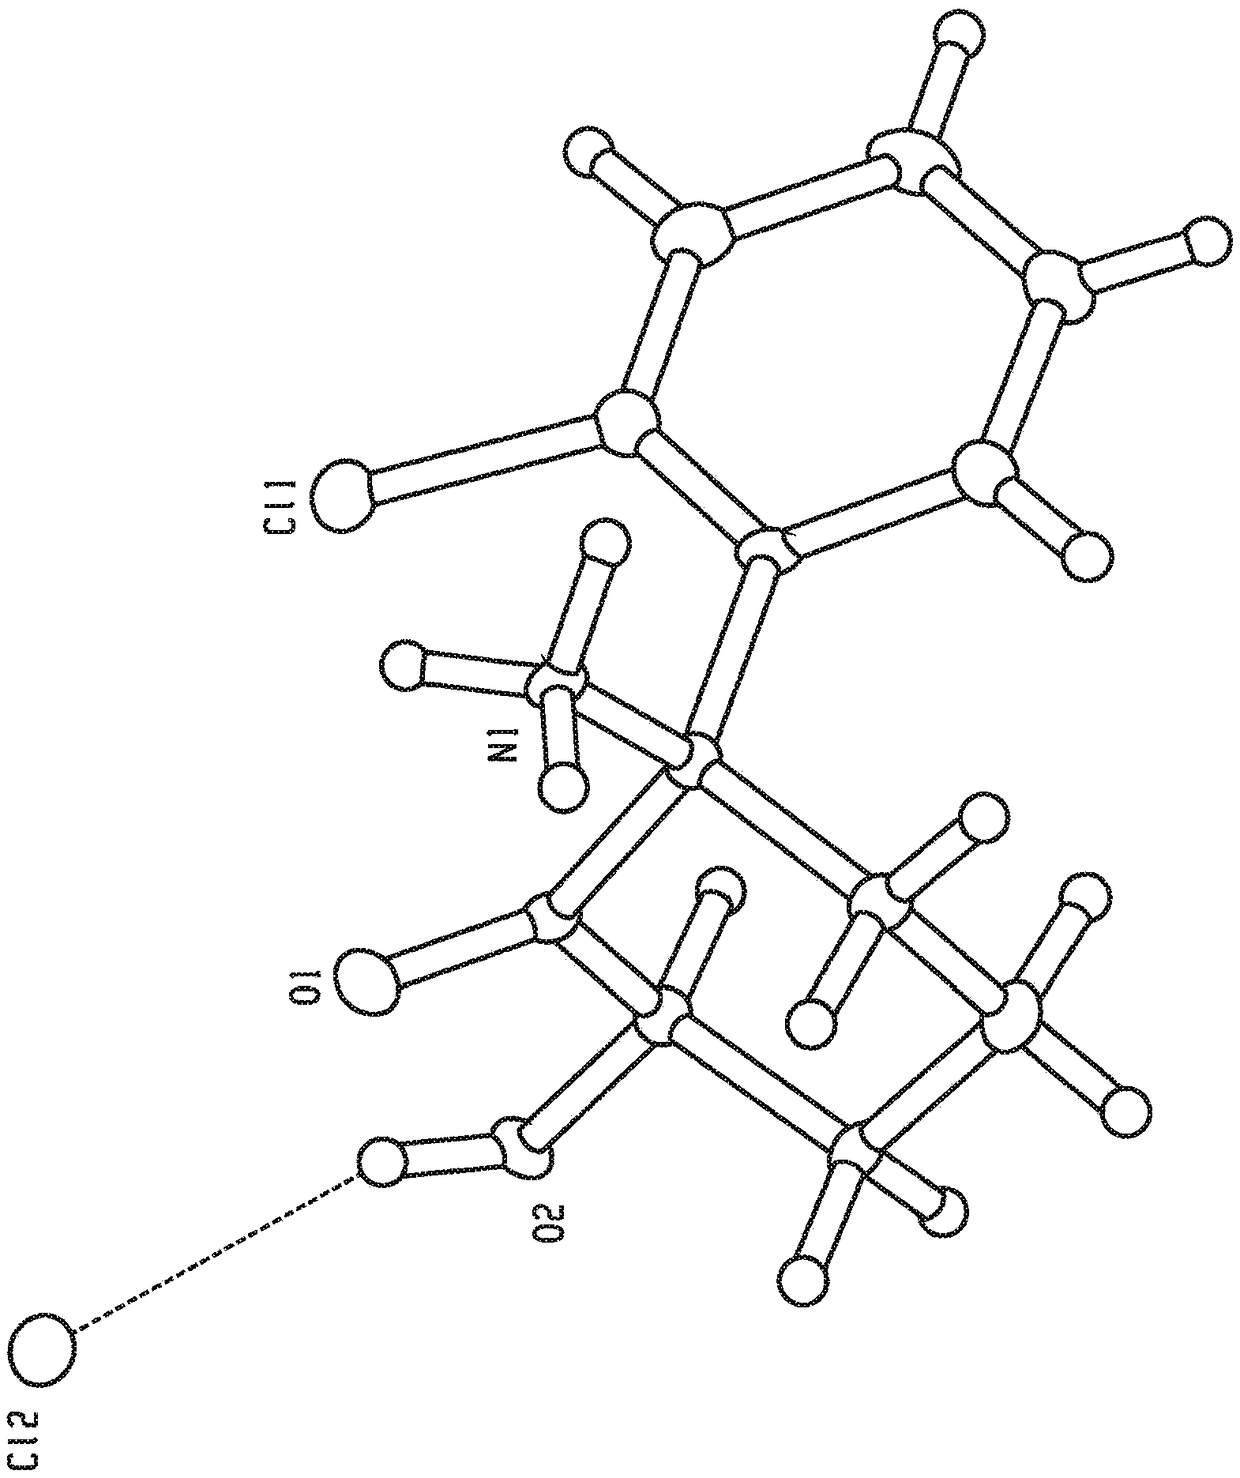 Crystal forms and methods of synthesis of (2r, 6r)-hydroxynorketamine and (2s, 6s)-hydroxynorketamine